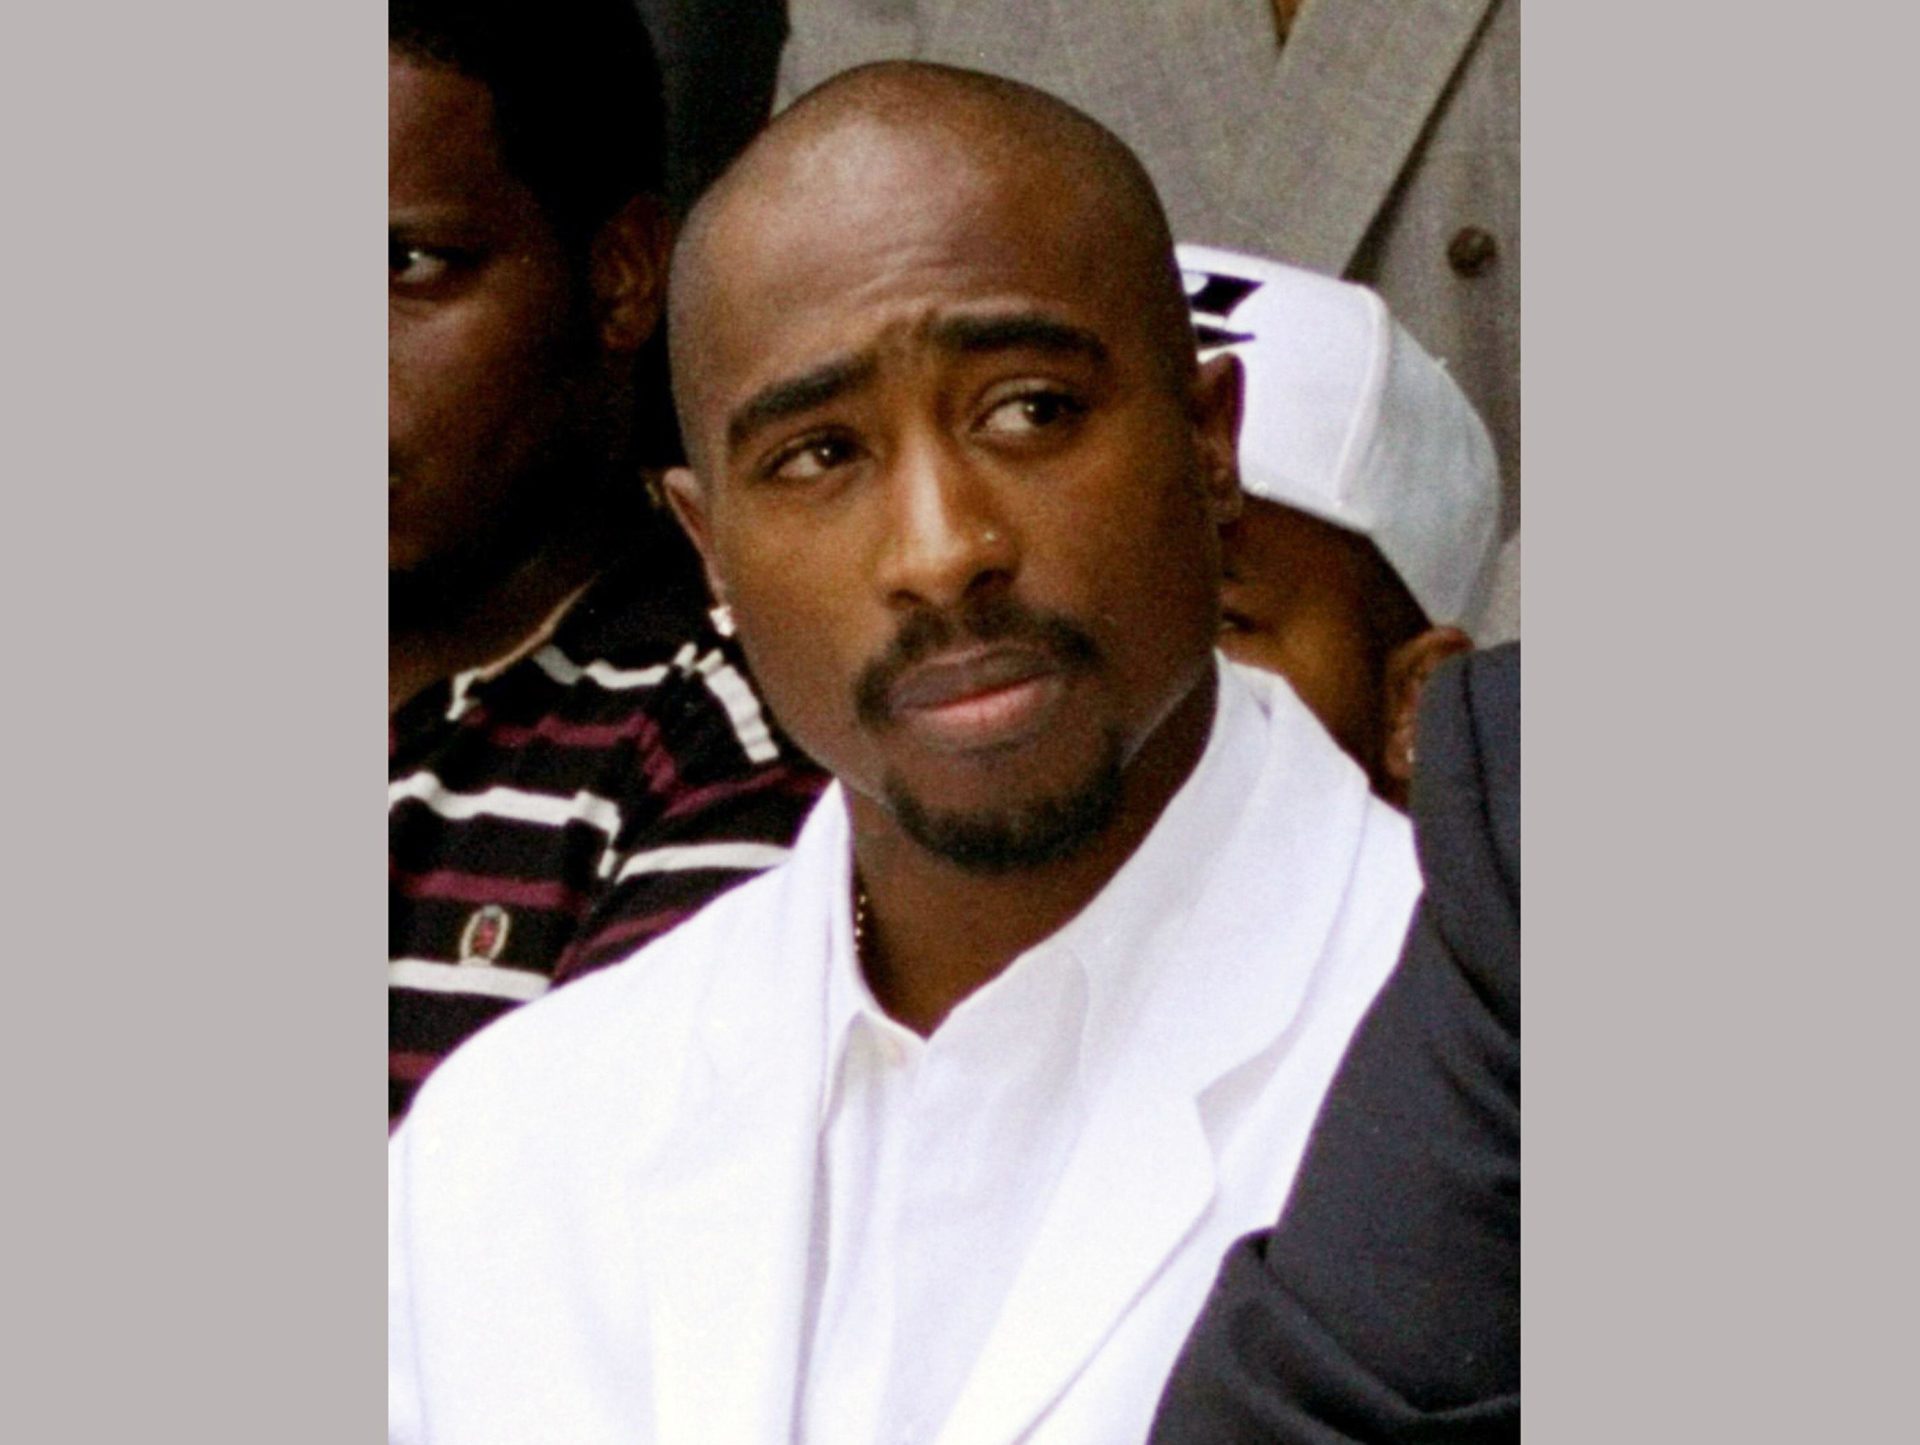 Tupac Shakur attends a voter registration event in Los Angeles in August 1996.